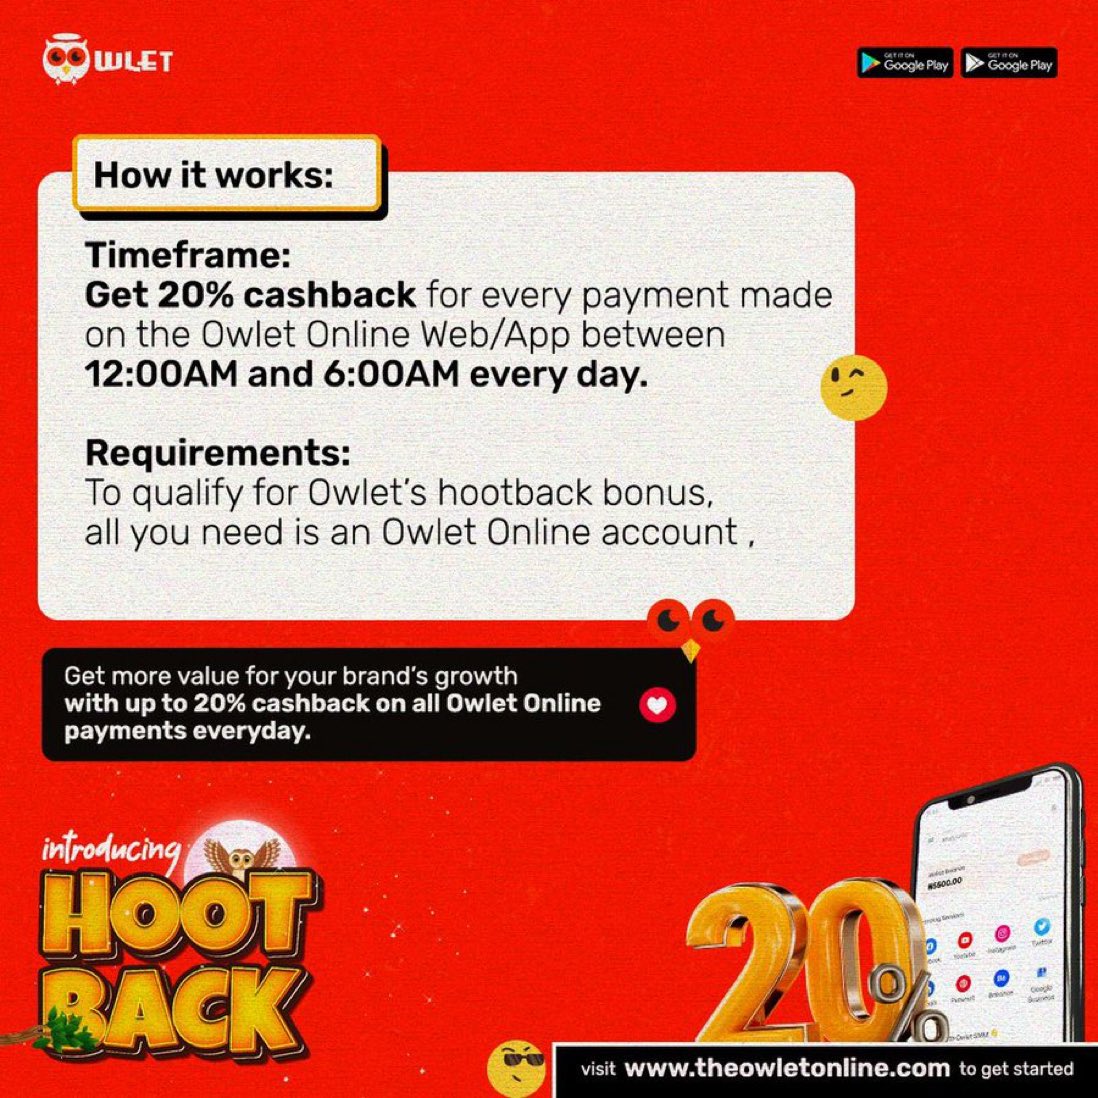 You are eligible to enjoy 20% cashback on all transactions you conduct on theowletonline.com between 12-6am daily! 

Use the Hoot back feature to boost your brand's visibility and reach on #OwletOnline and save money while at it!